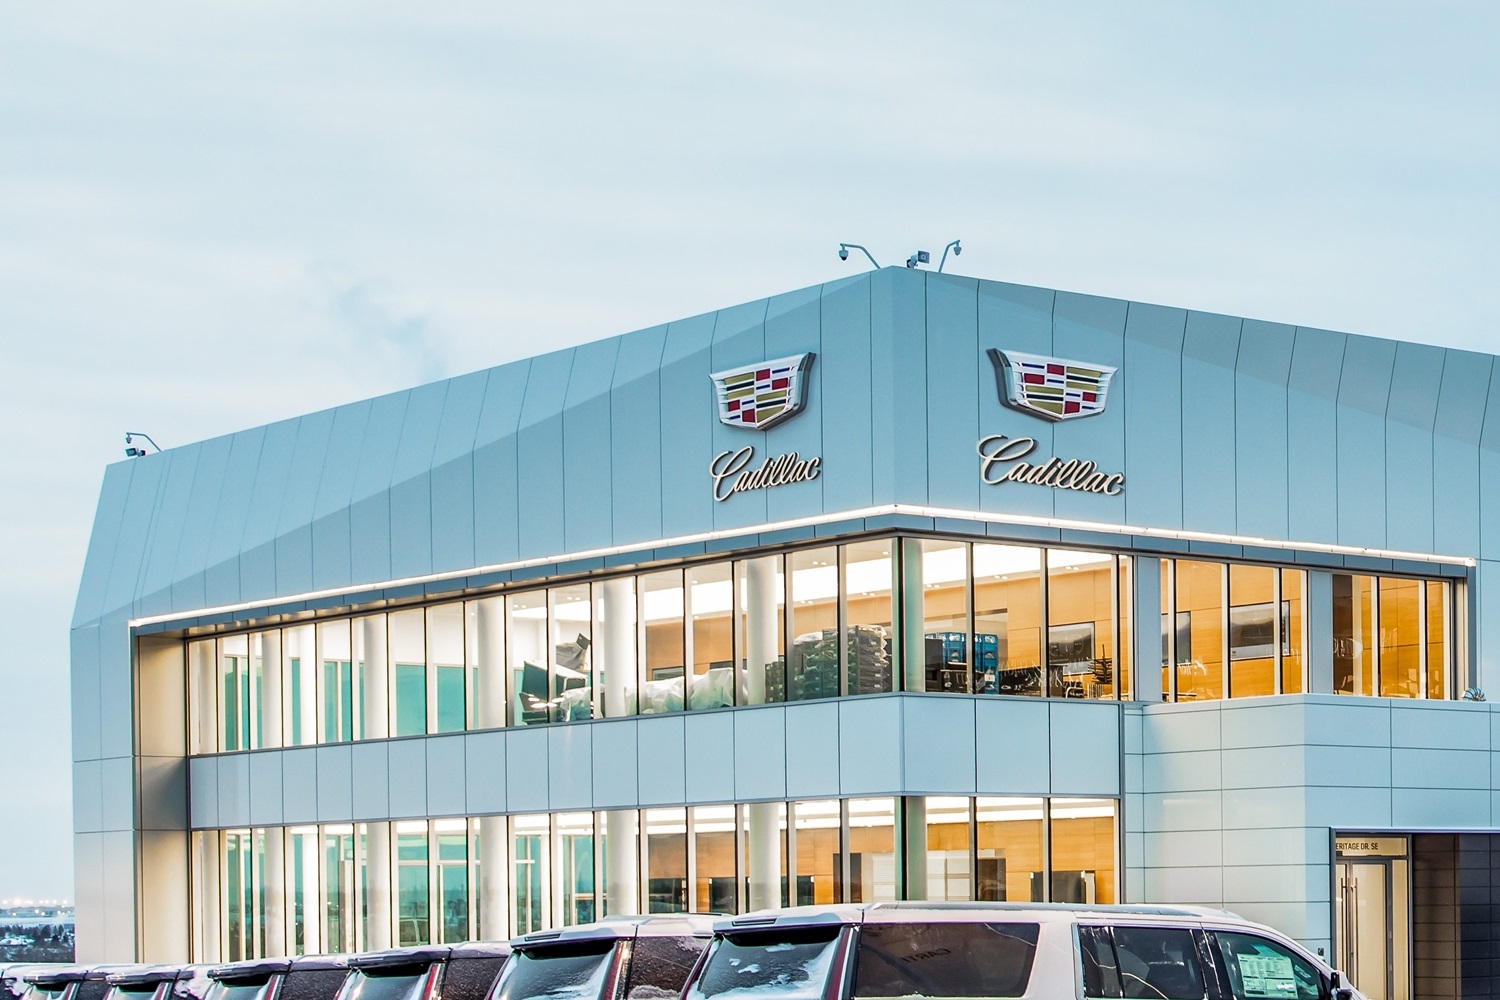 Cadillac Dealer Count Is Now Down To 564 Storefronts In The U.S. - Best